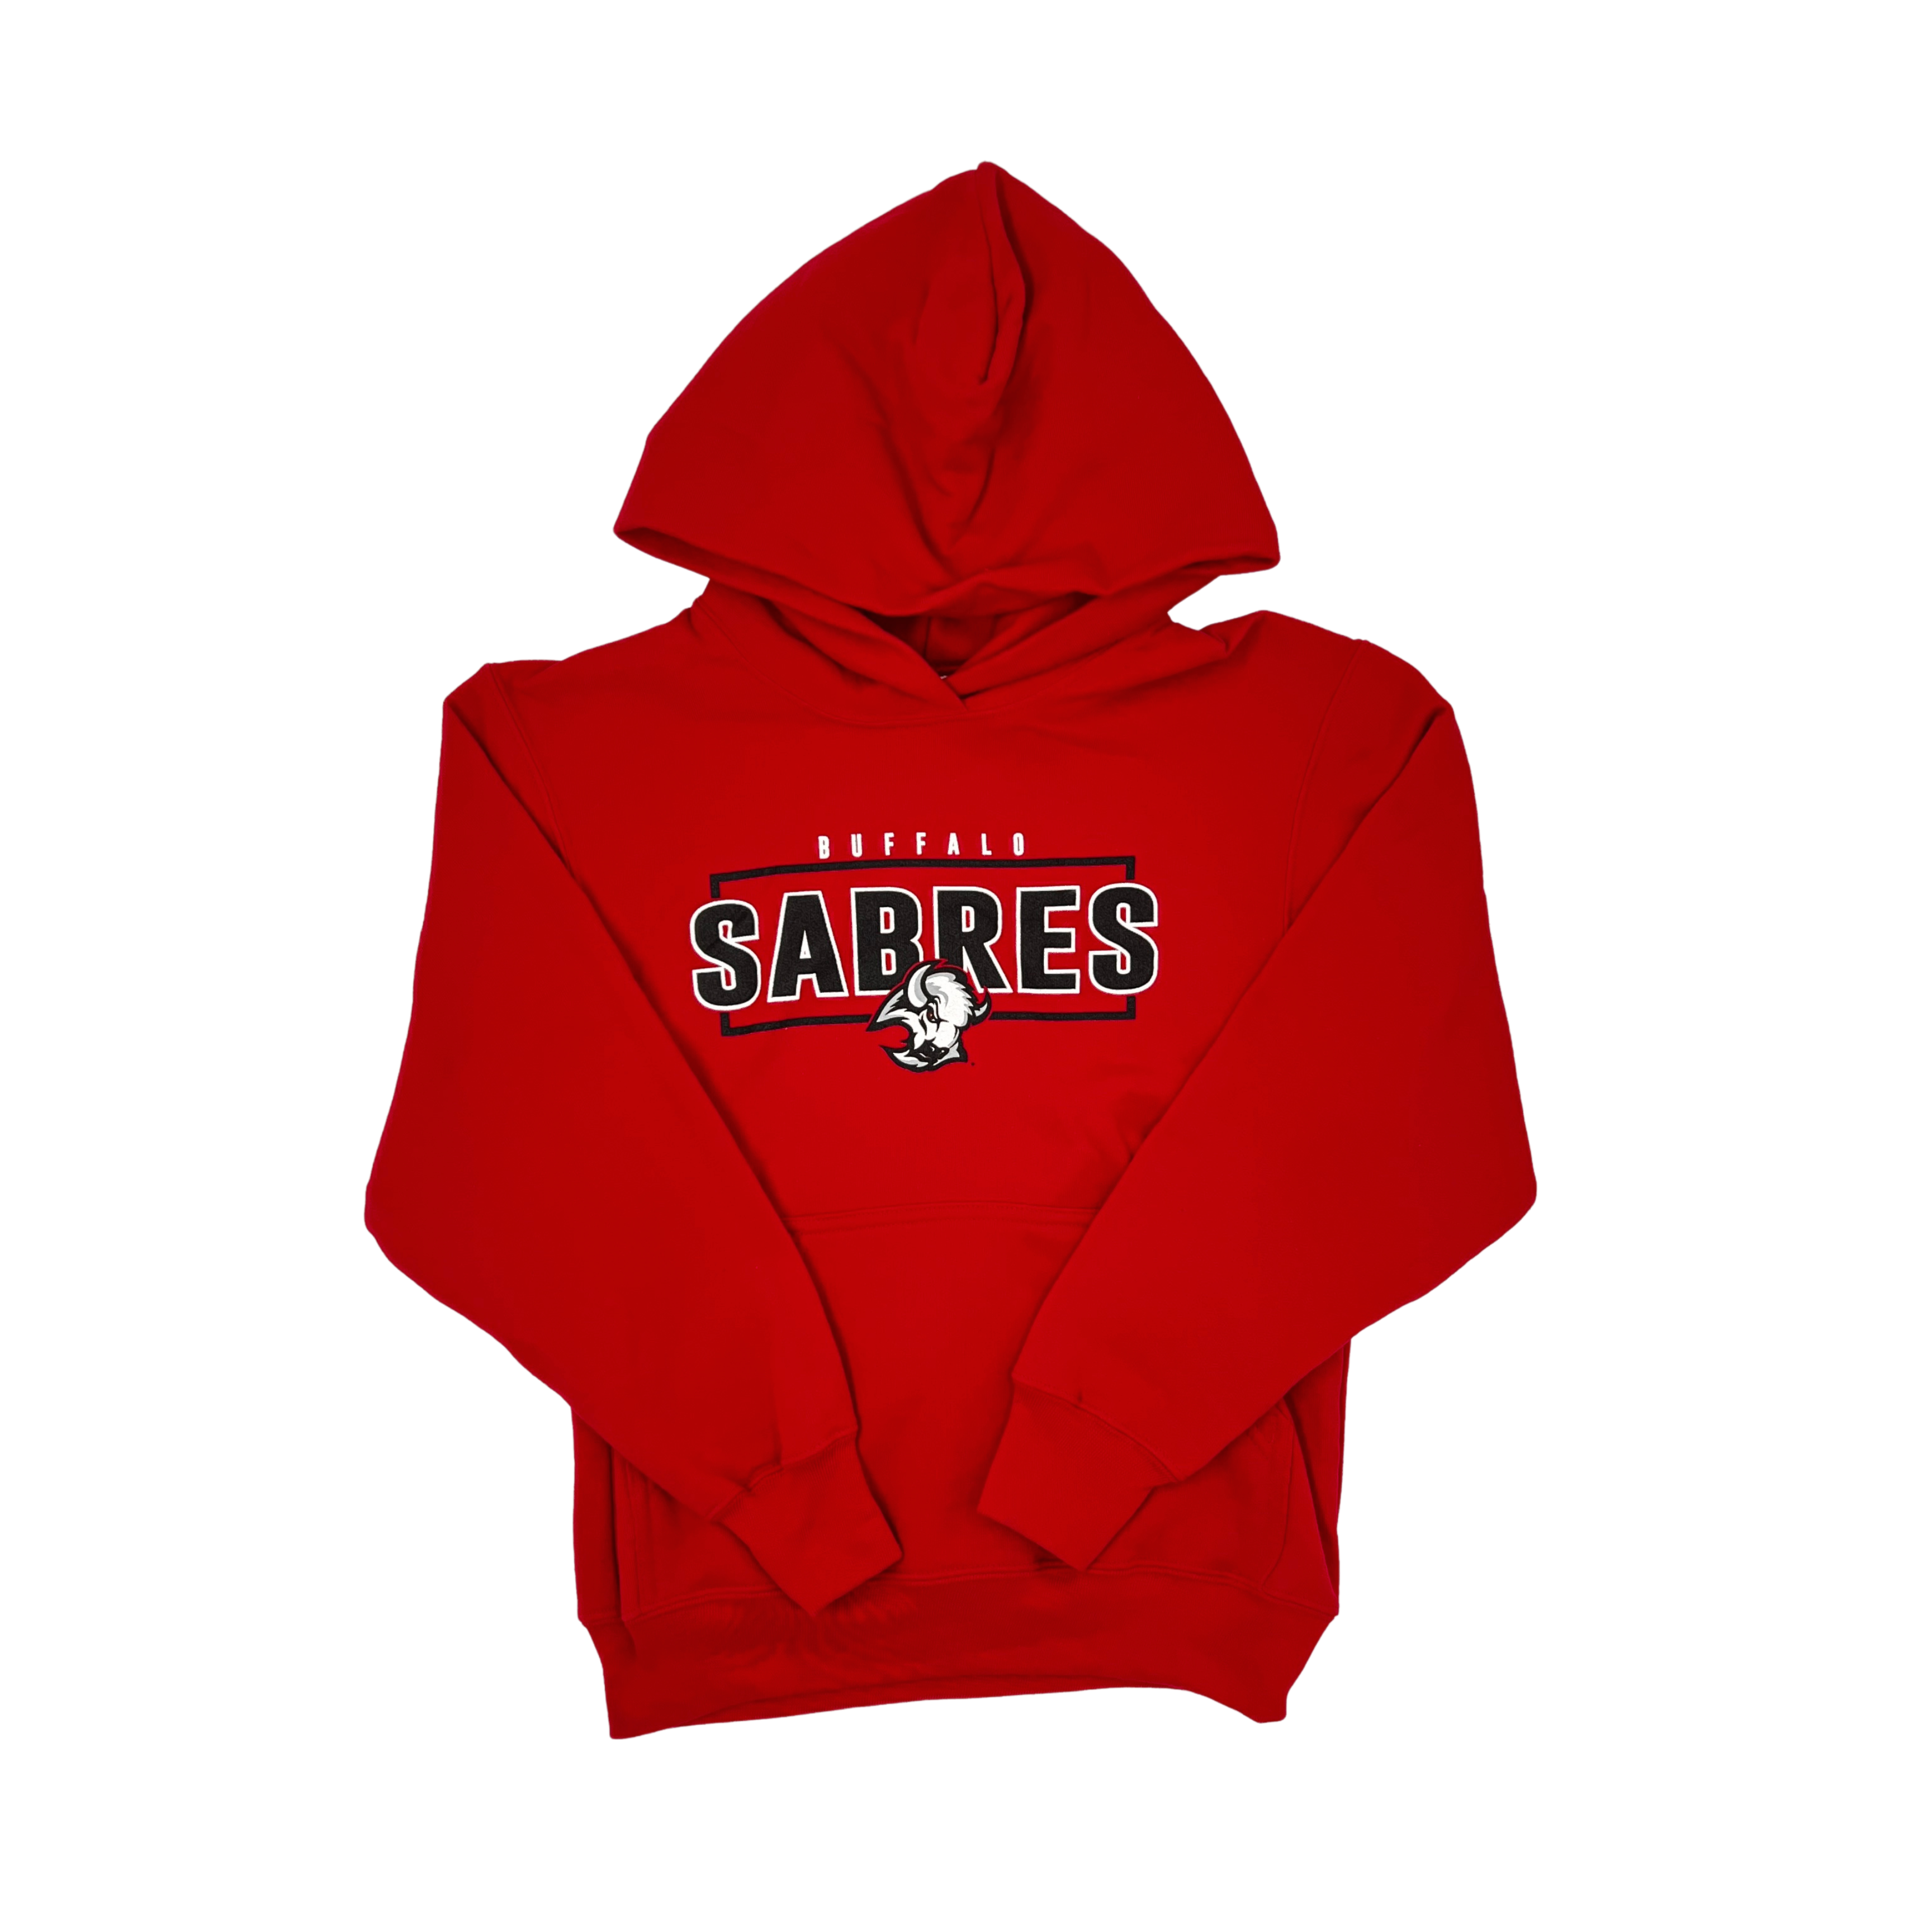 Buffalo Sabres Vintage Goat Head Logo Youth Fleece Hoodie - Size L - Red